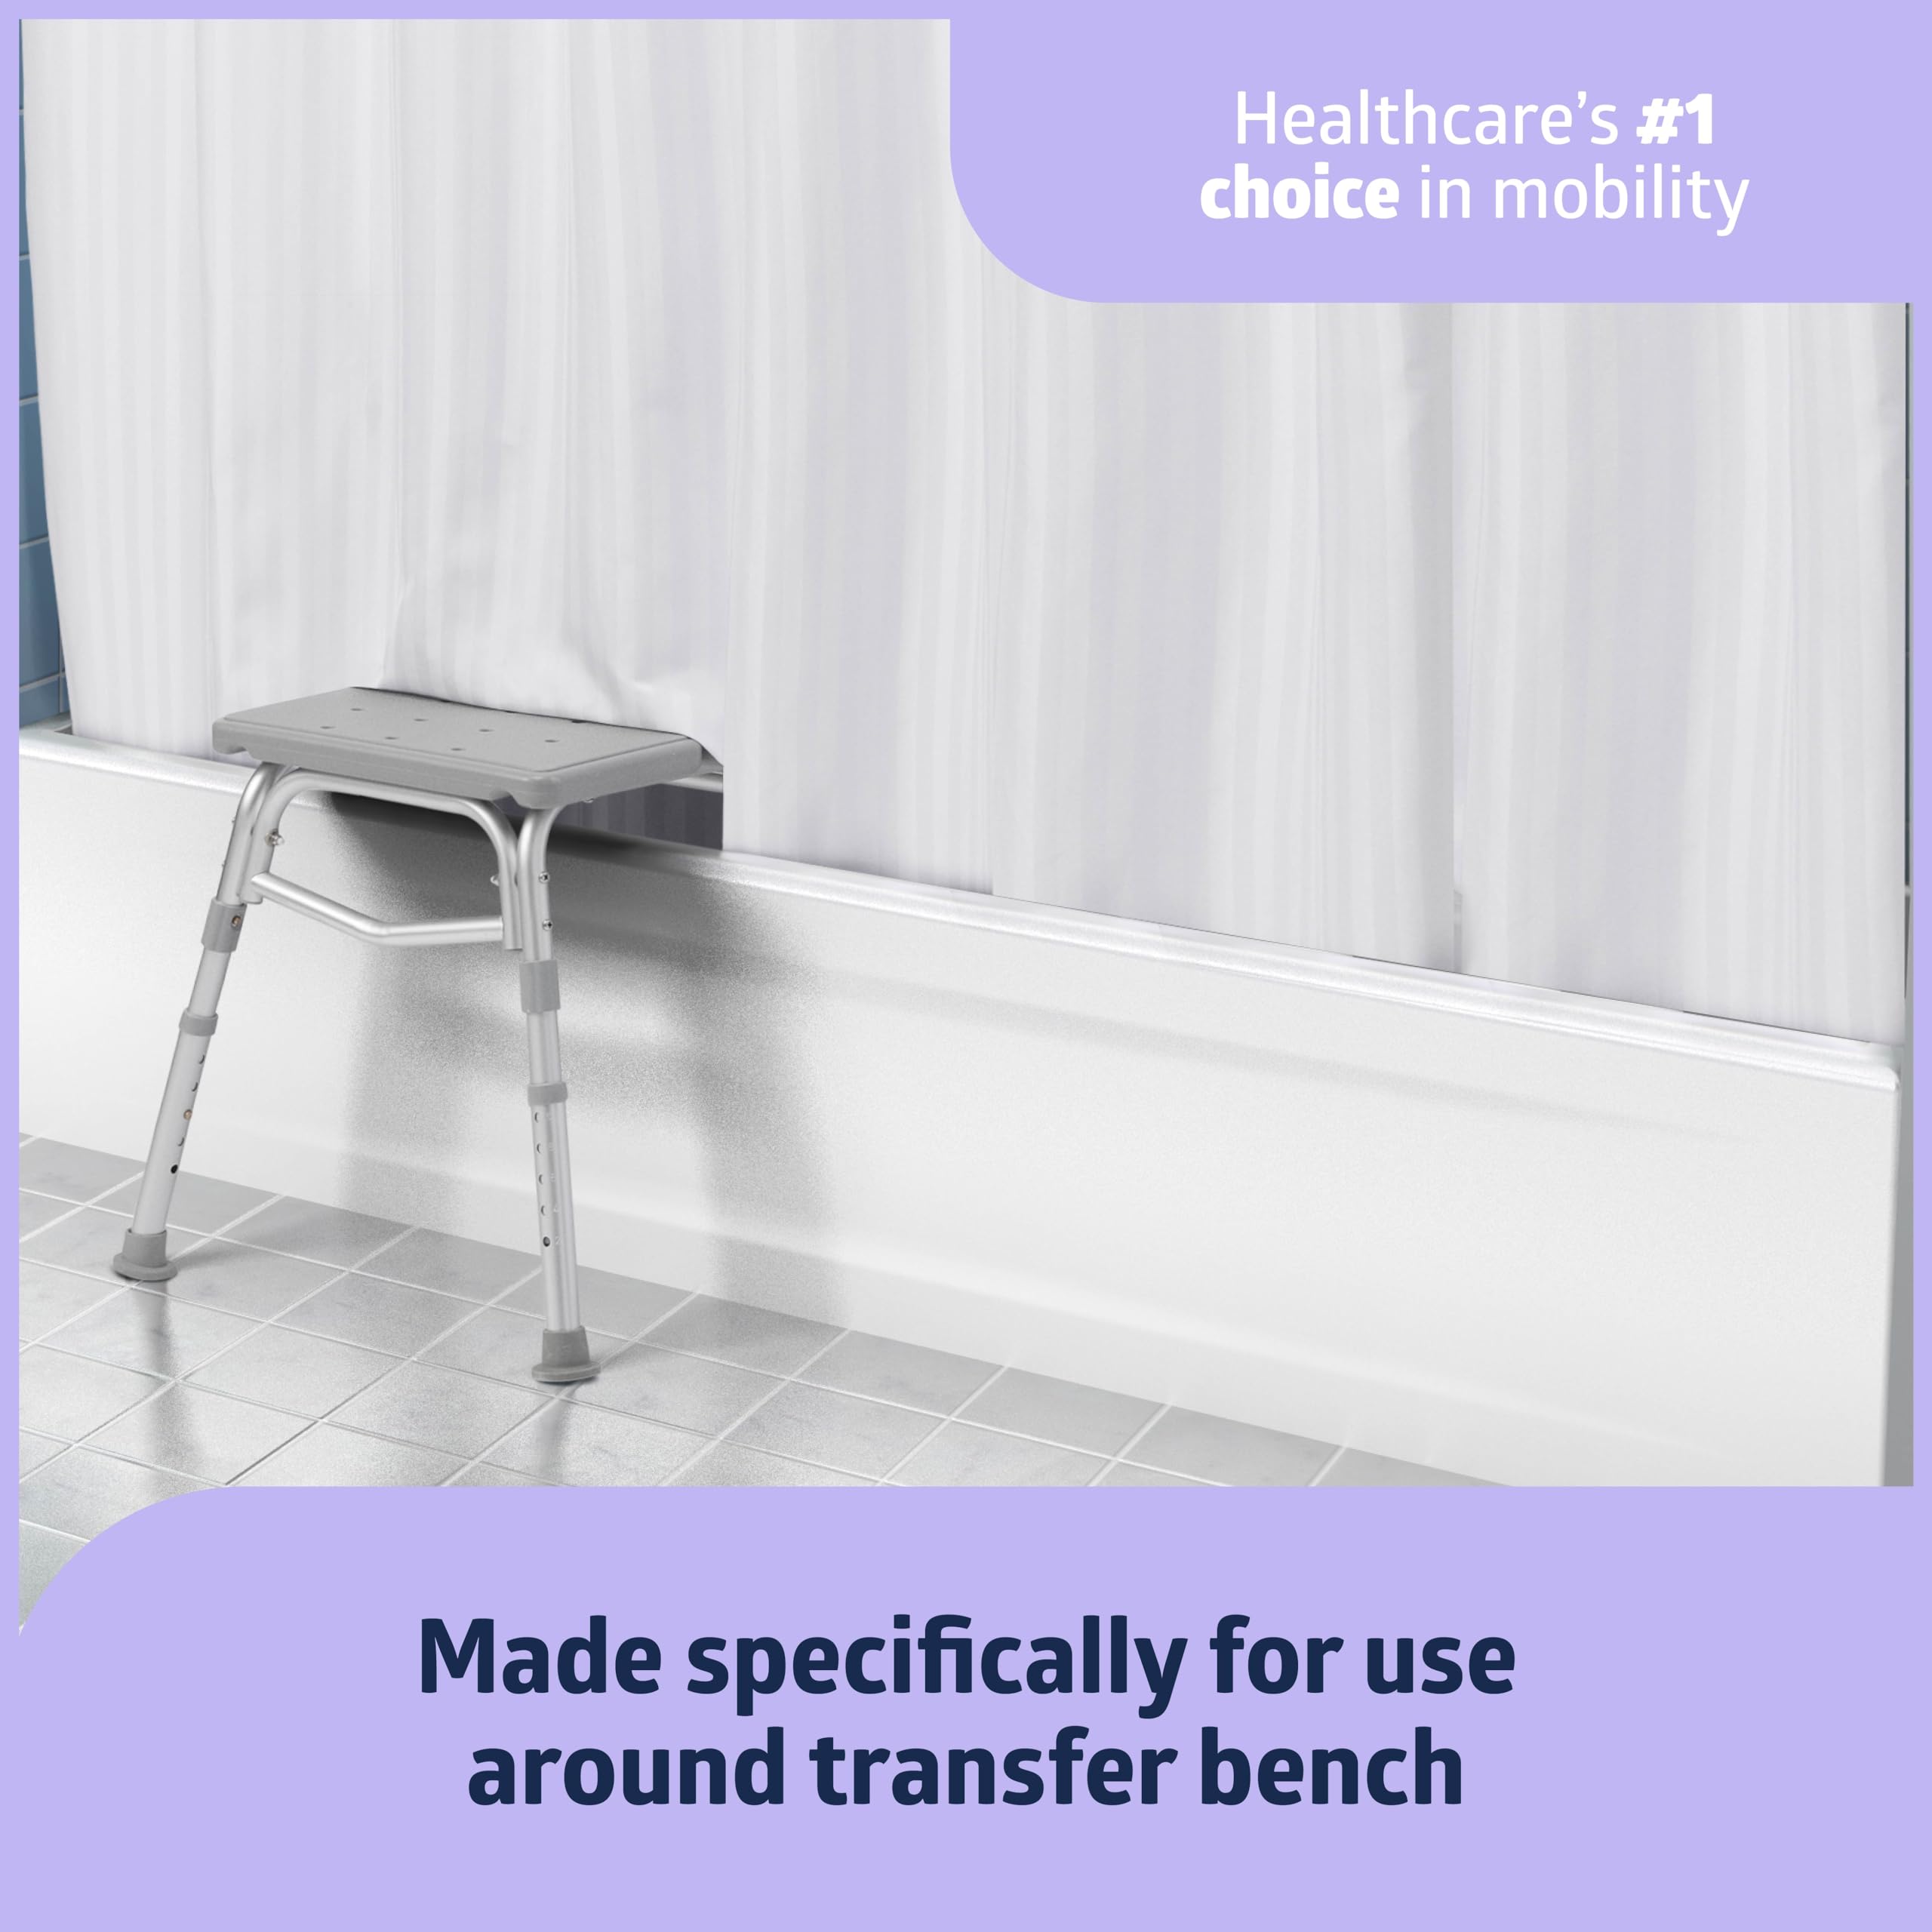 Medline Bath Combo for Caregivers, Seniors and Adults: Transfer Bench & Shower Curtain with 2-Pack Loofah for Disabled, Seniors, Elderly, Adults - 1 Ct.